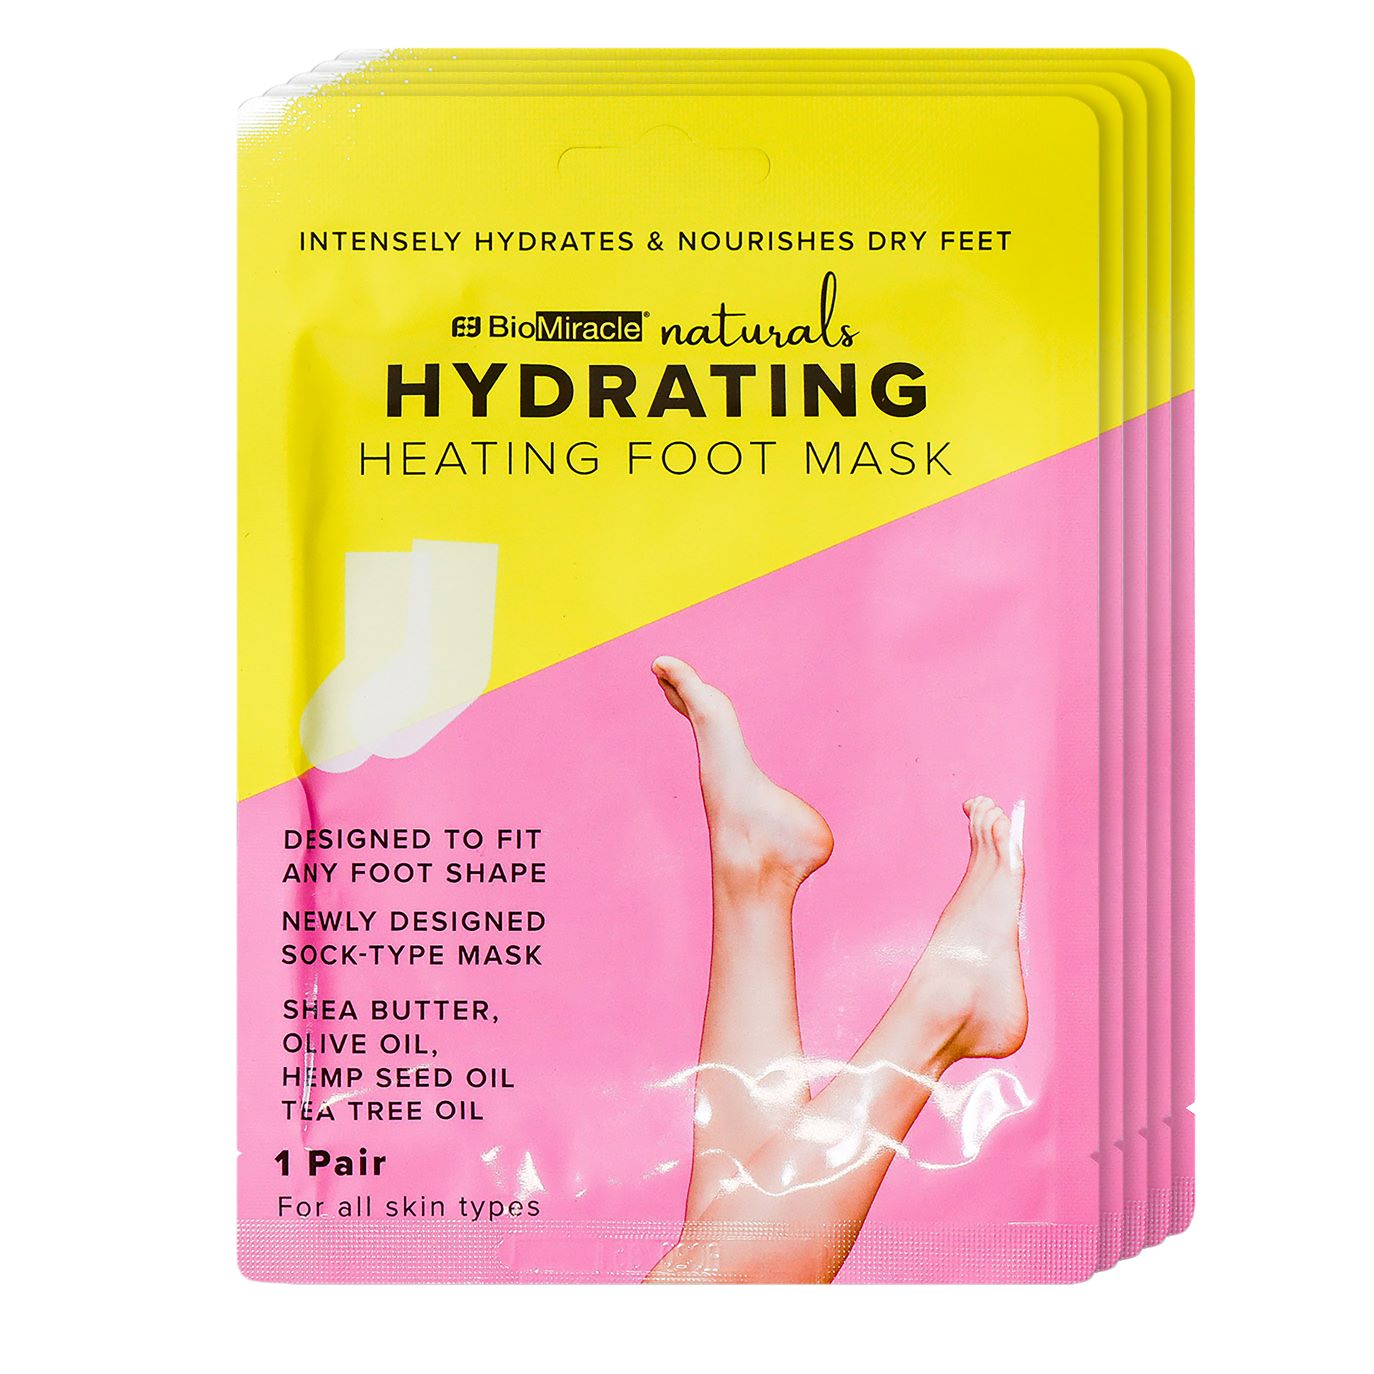 Hydrating Heating Foot Mask 5 Pack